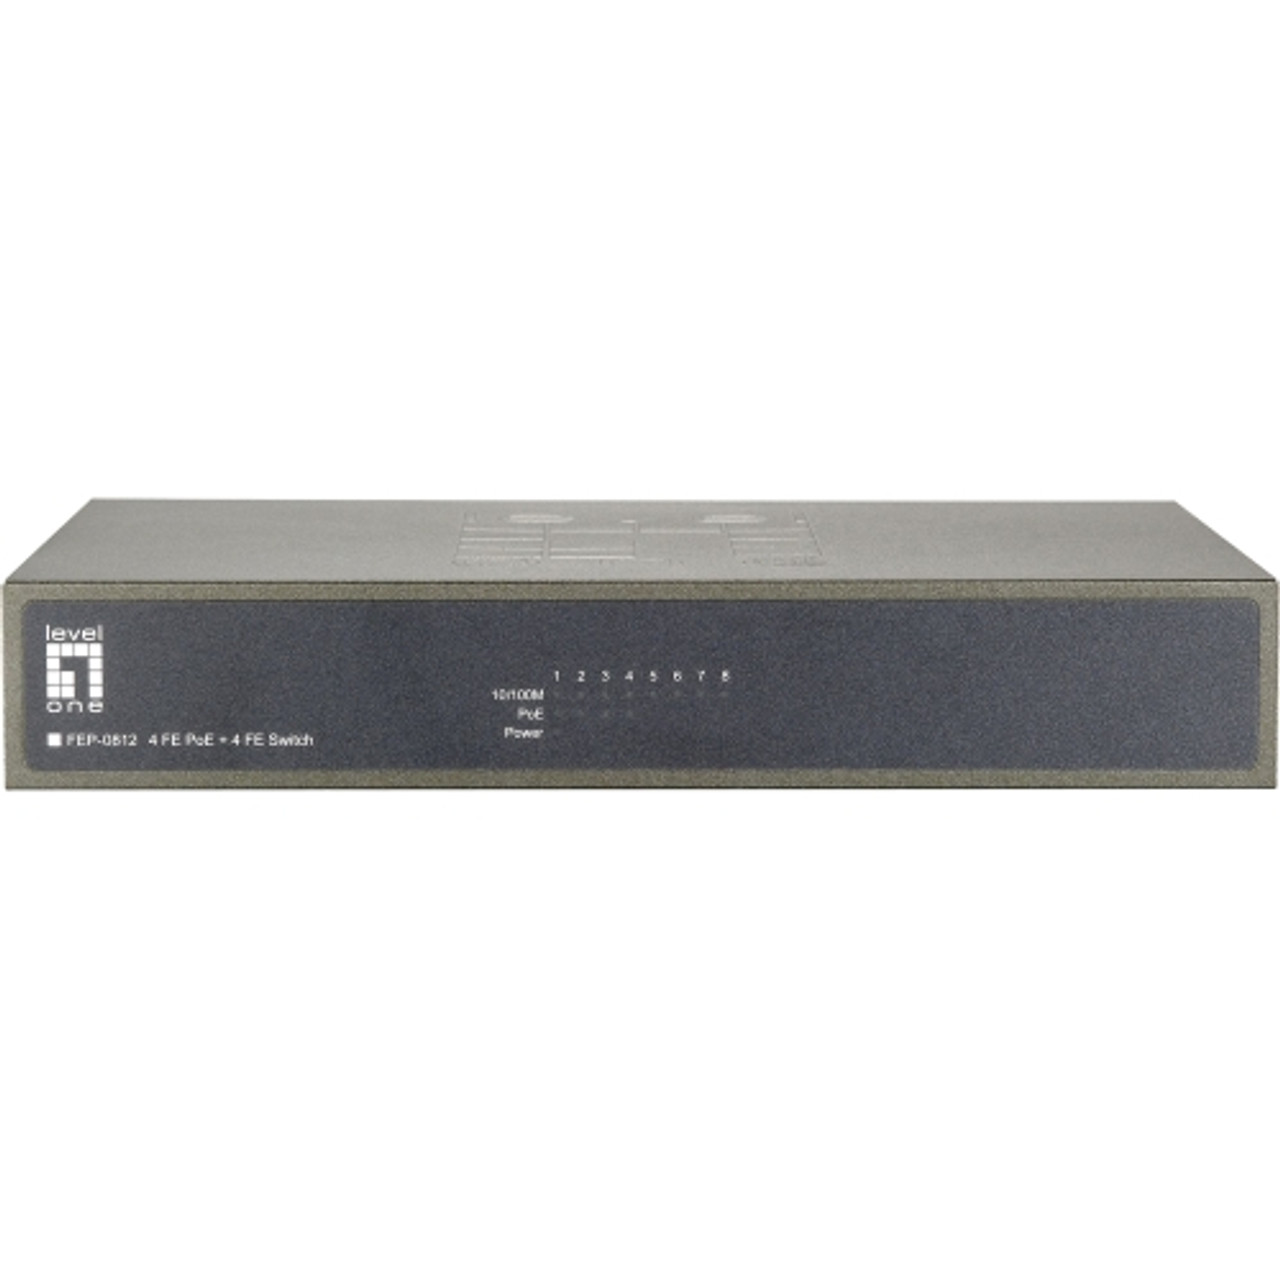 FEP-0812 LevelOne 8-Port 10/100 w/4-Port PoE Desktop Switch 8 x Fast Ethernet Network 2 Layer Supported Rack-mountable (Refurbished)